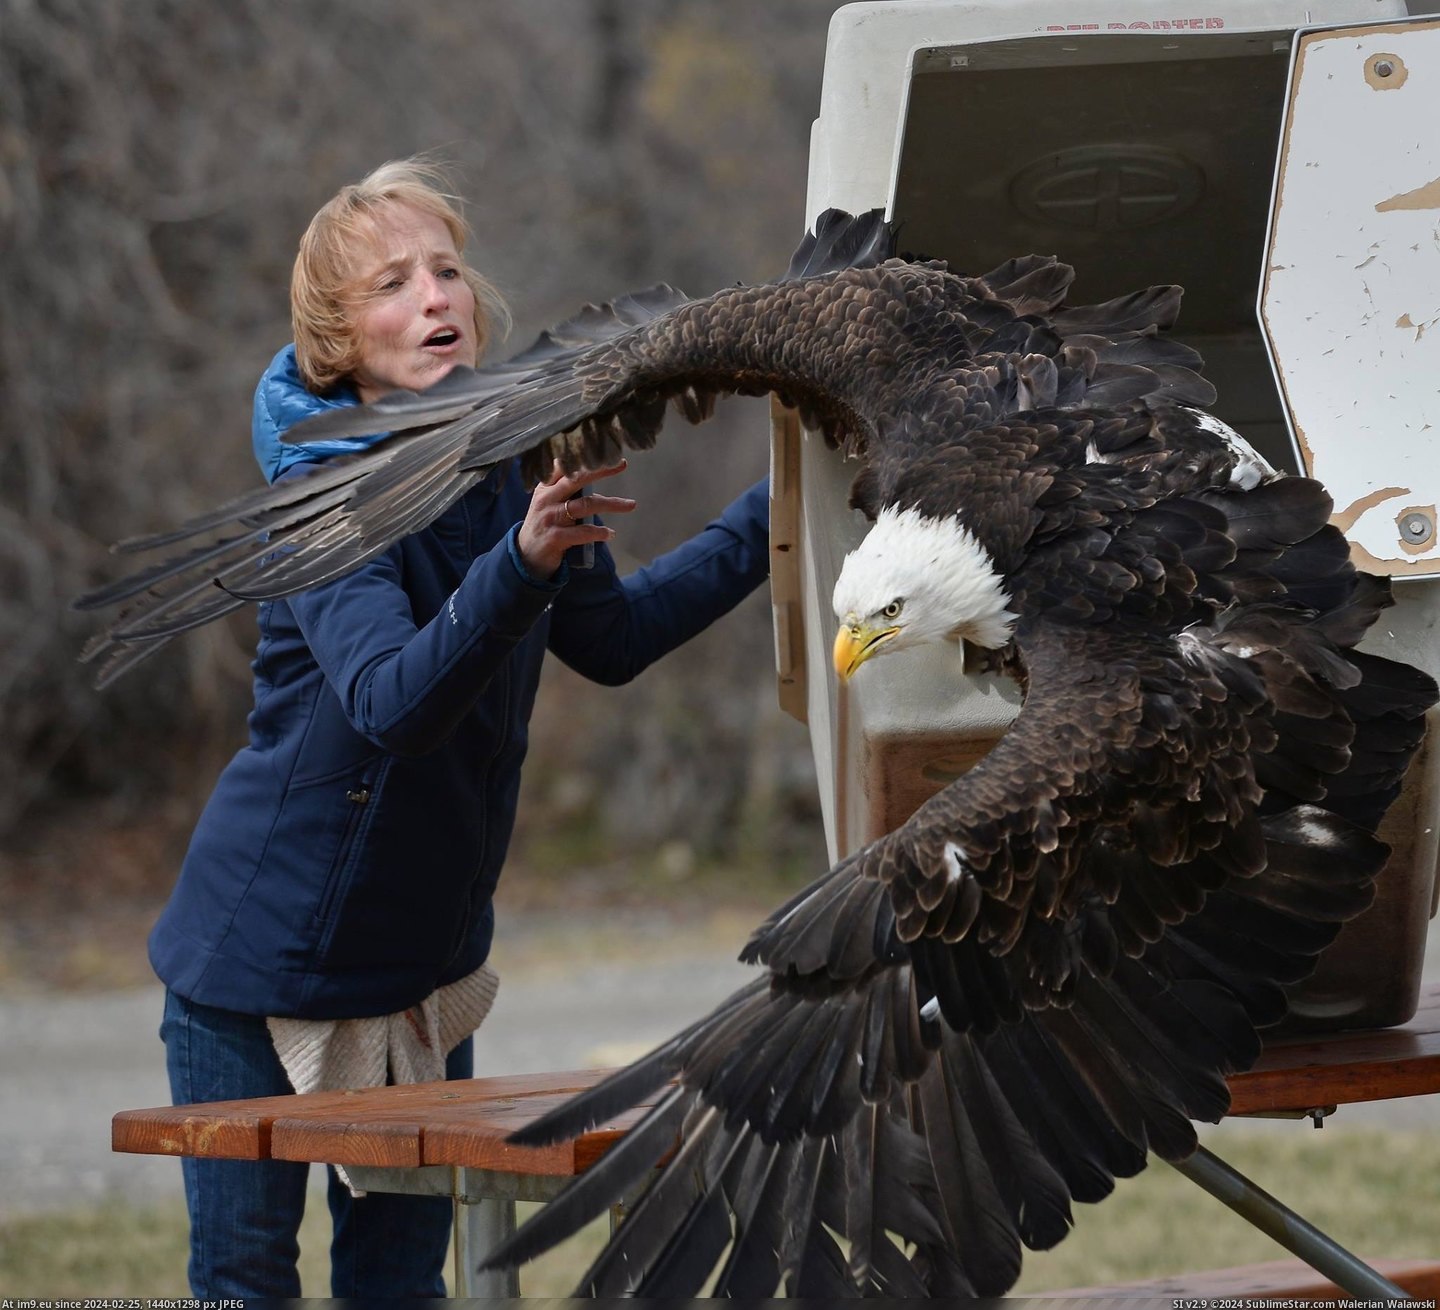 #Trap #Caught #Center #Released #Conservation #Montana #Eagle #Bald [Pics] This bald eagle was found caught in a trap and rehabilitated by the Montana Raptor Conservation Center. It was released b Pic. (Image of album My r/PICS favs))